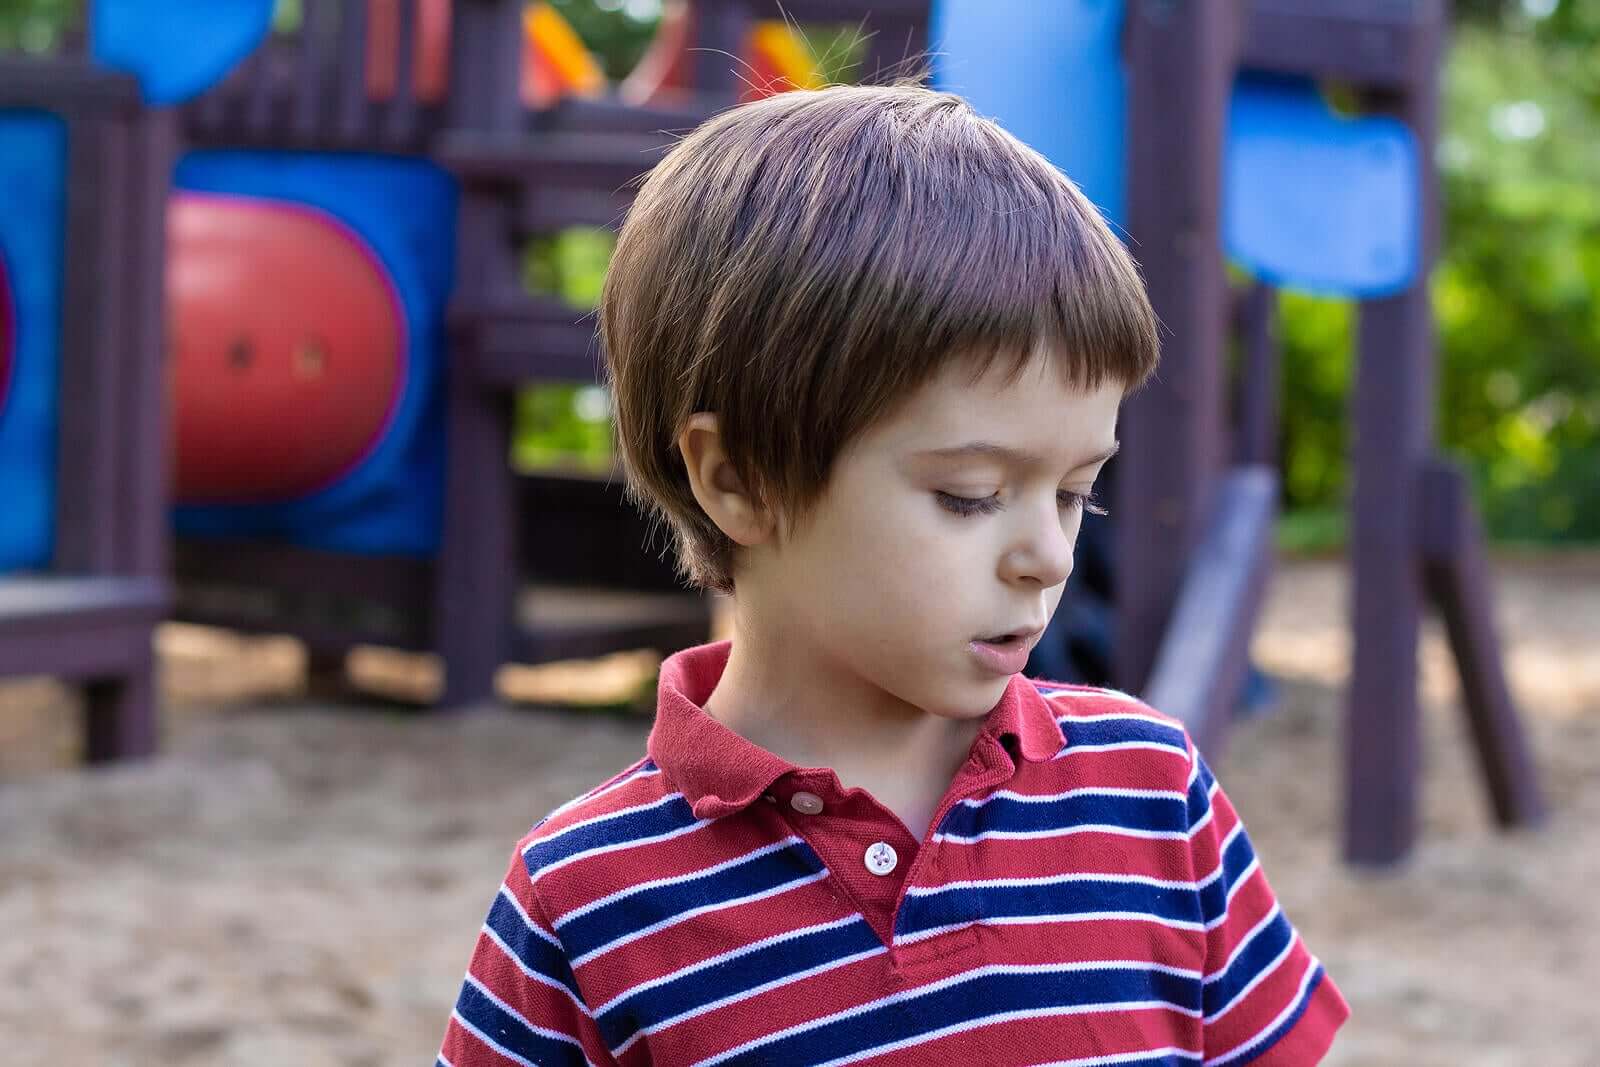 A child talking to himself on a playground.